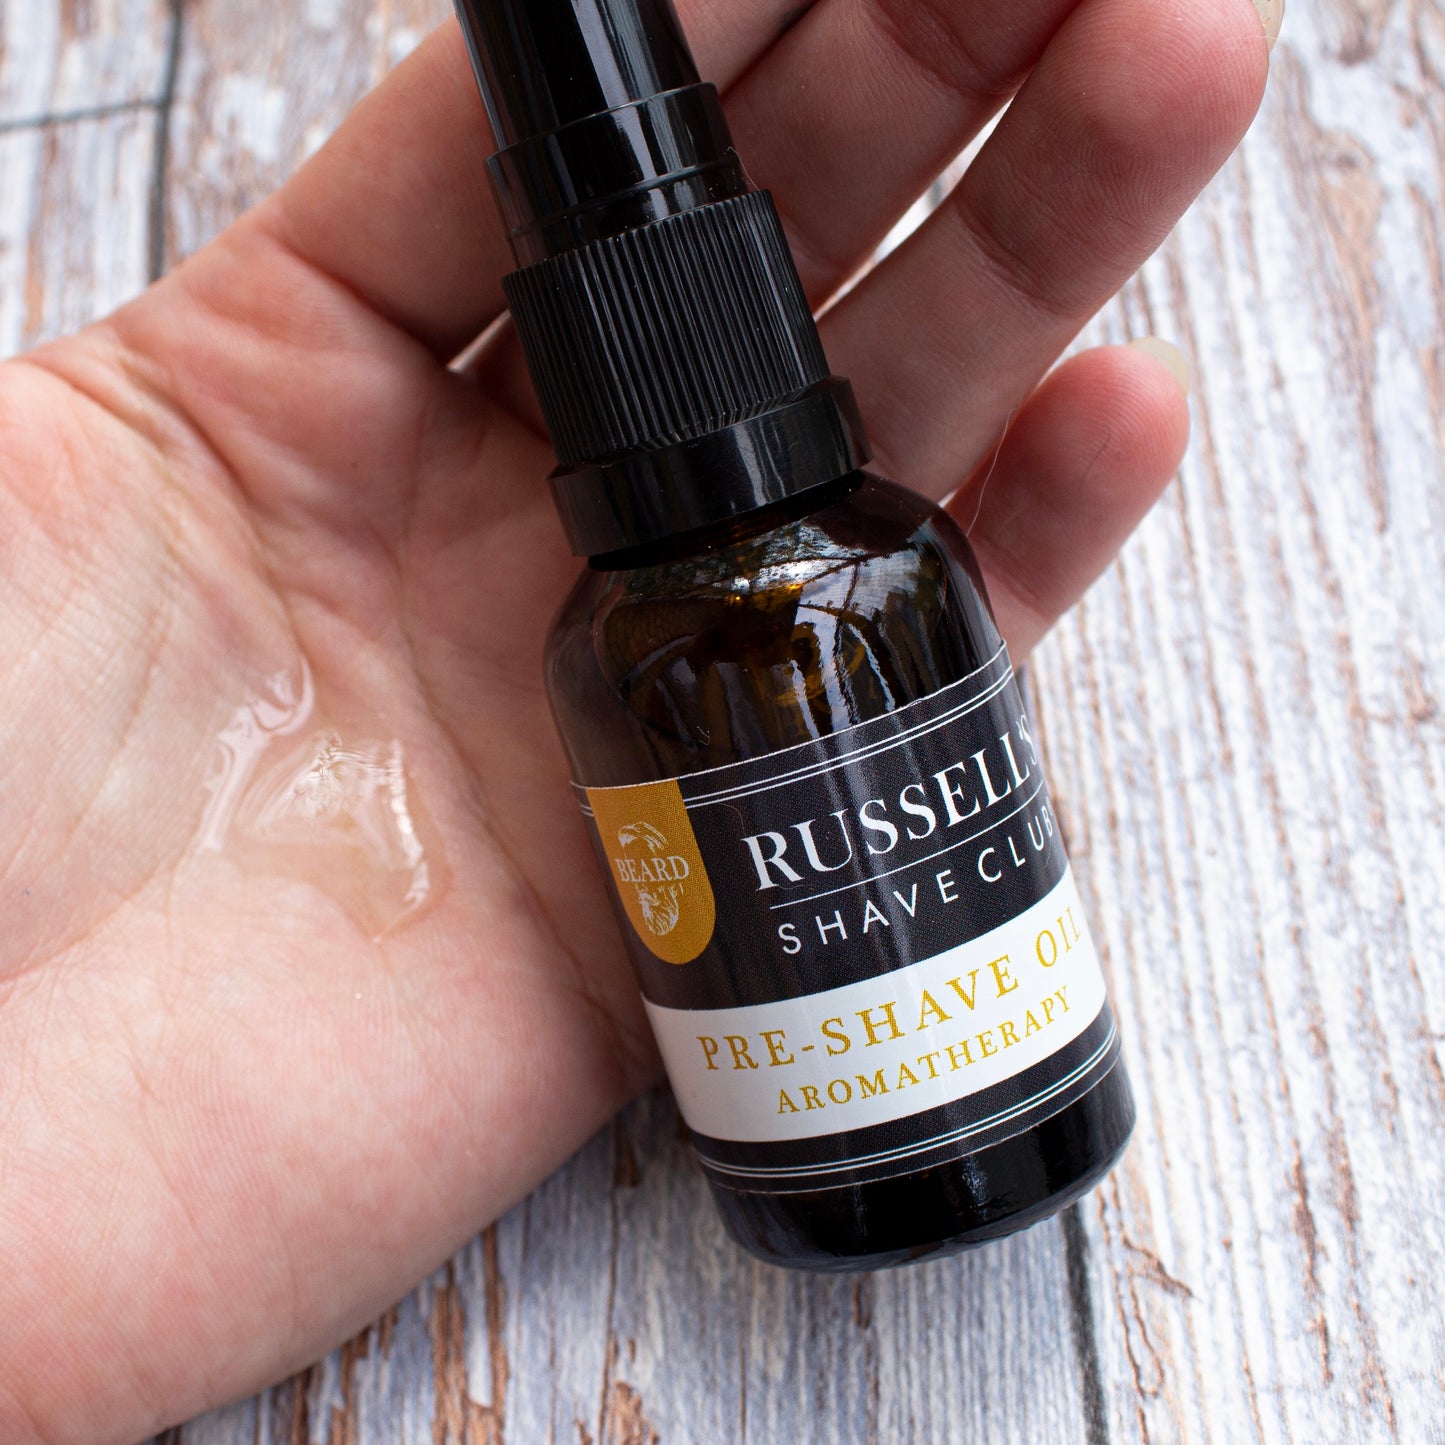 The Ultimate Shaving Companion: Russell's Pre-Shave Oil and Post-Shave Balm